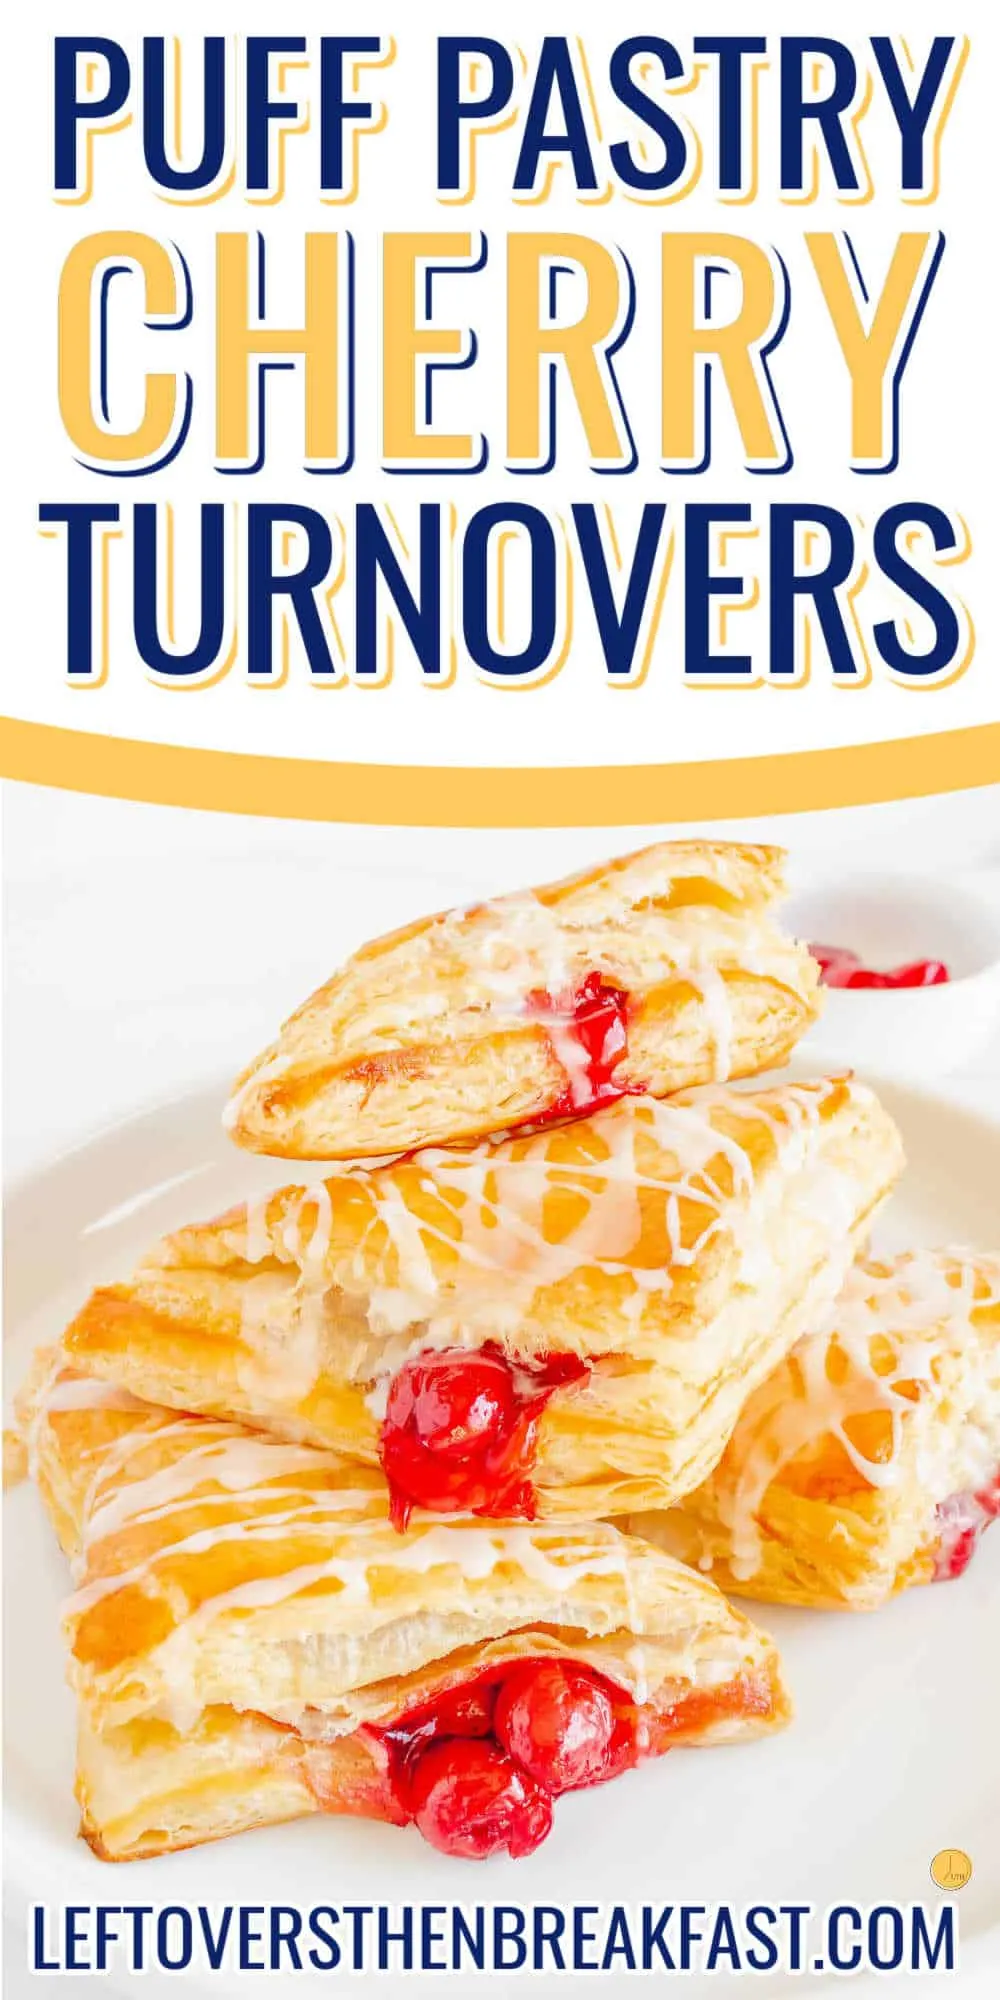 stack of cherry turnovers on a plate with text